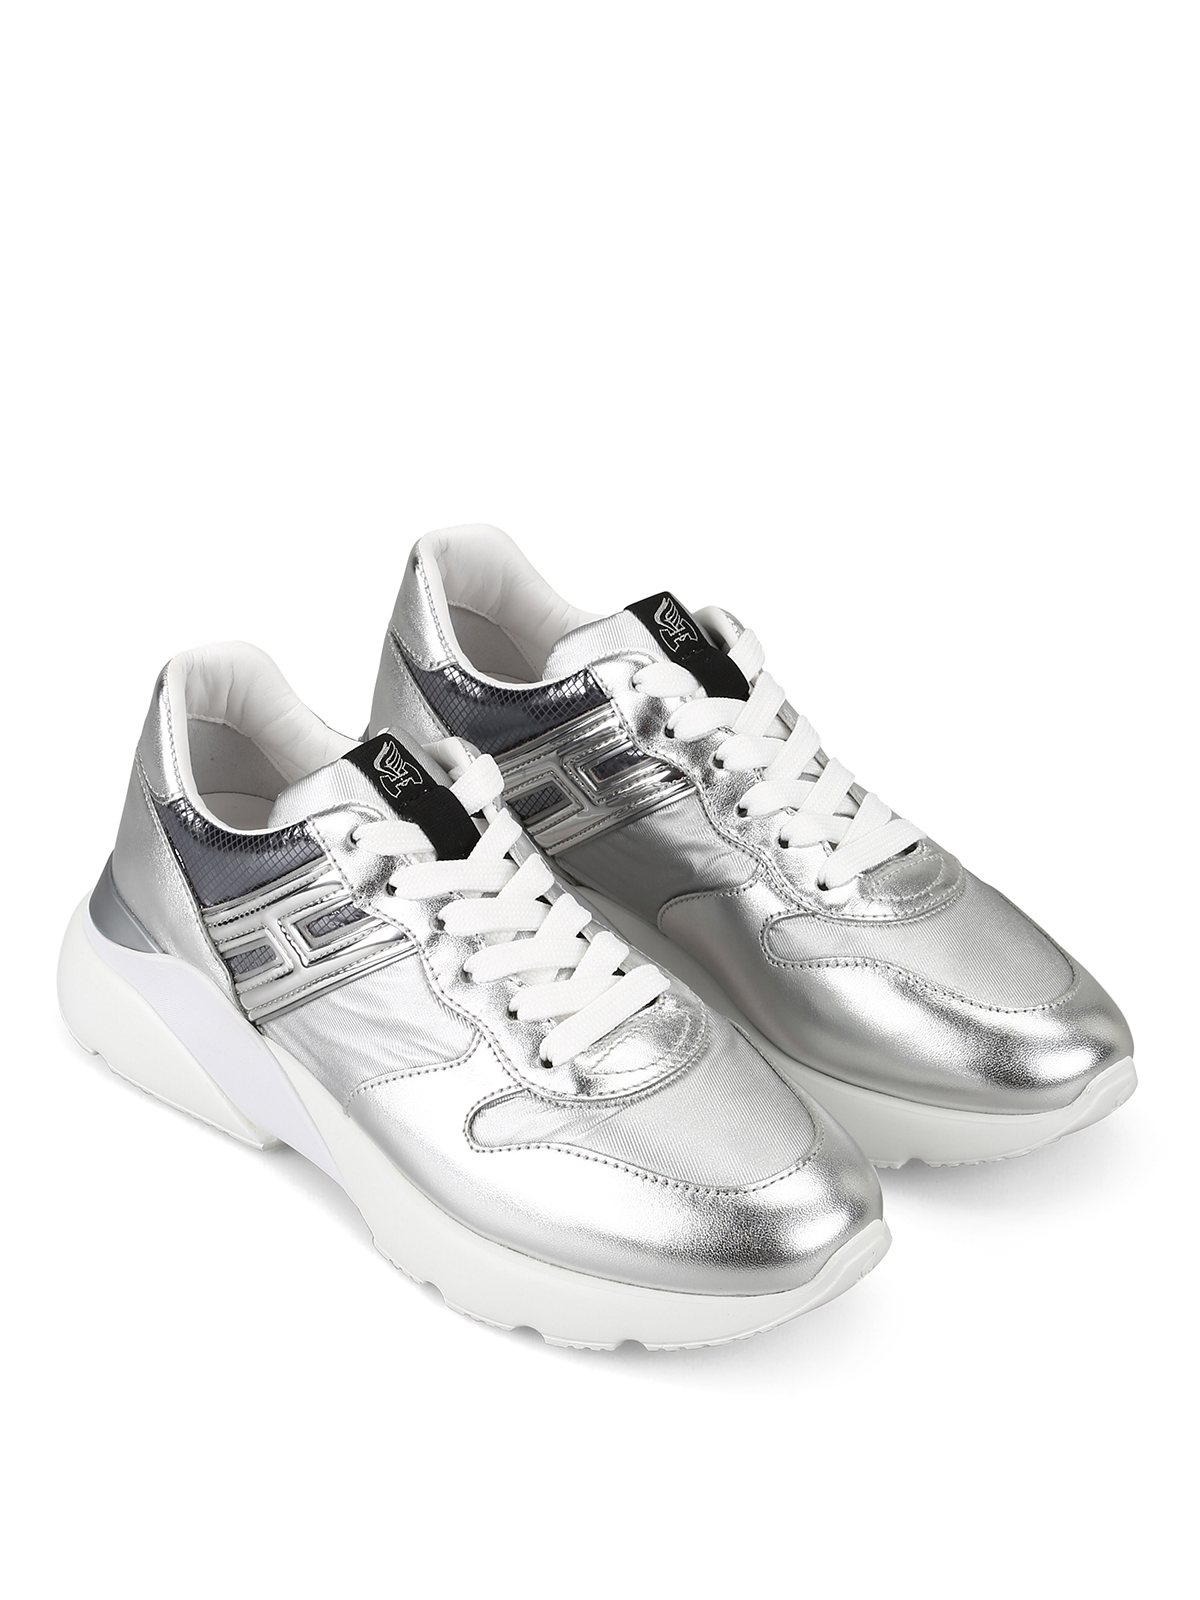 Hogan - Active One silver sneakers 